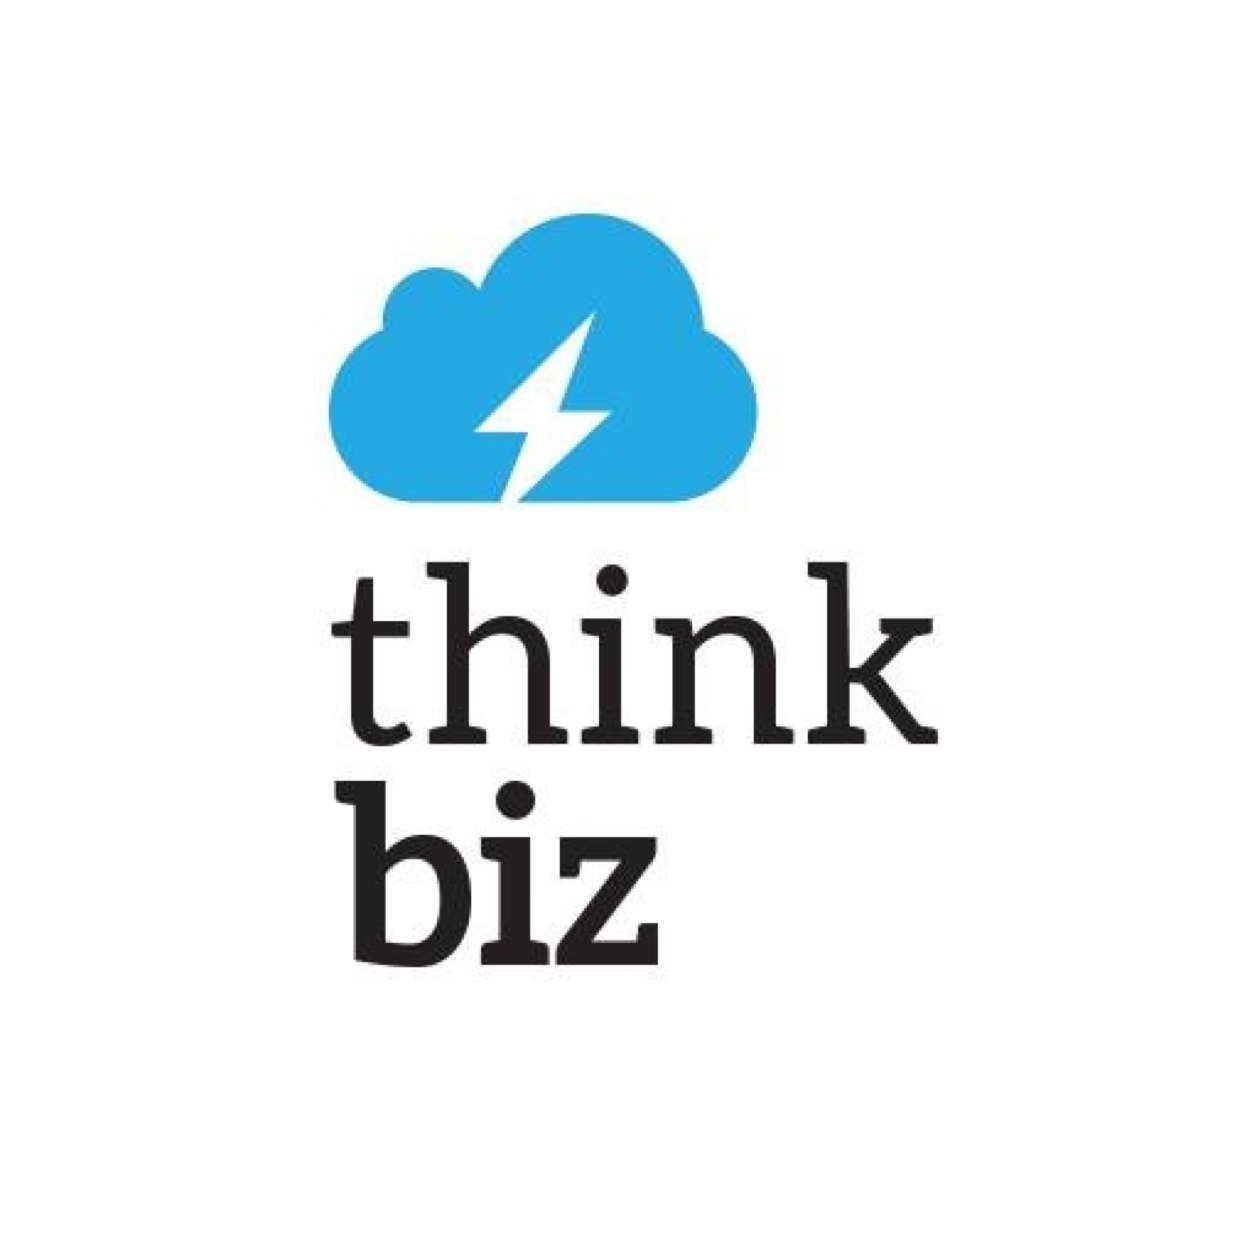 ThinkBiz is the first Student Entrepreneurship Club based in Athens, Greece, founded in an attempt to help the Greek Startup Ecosystem evolve.